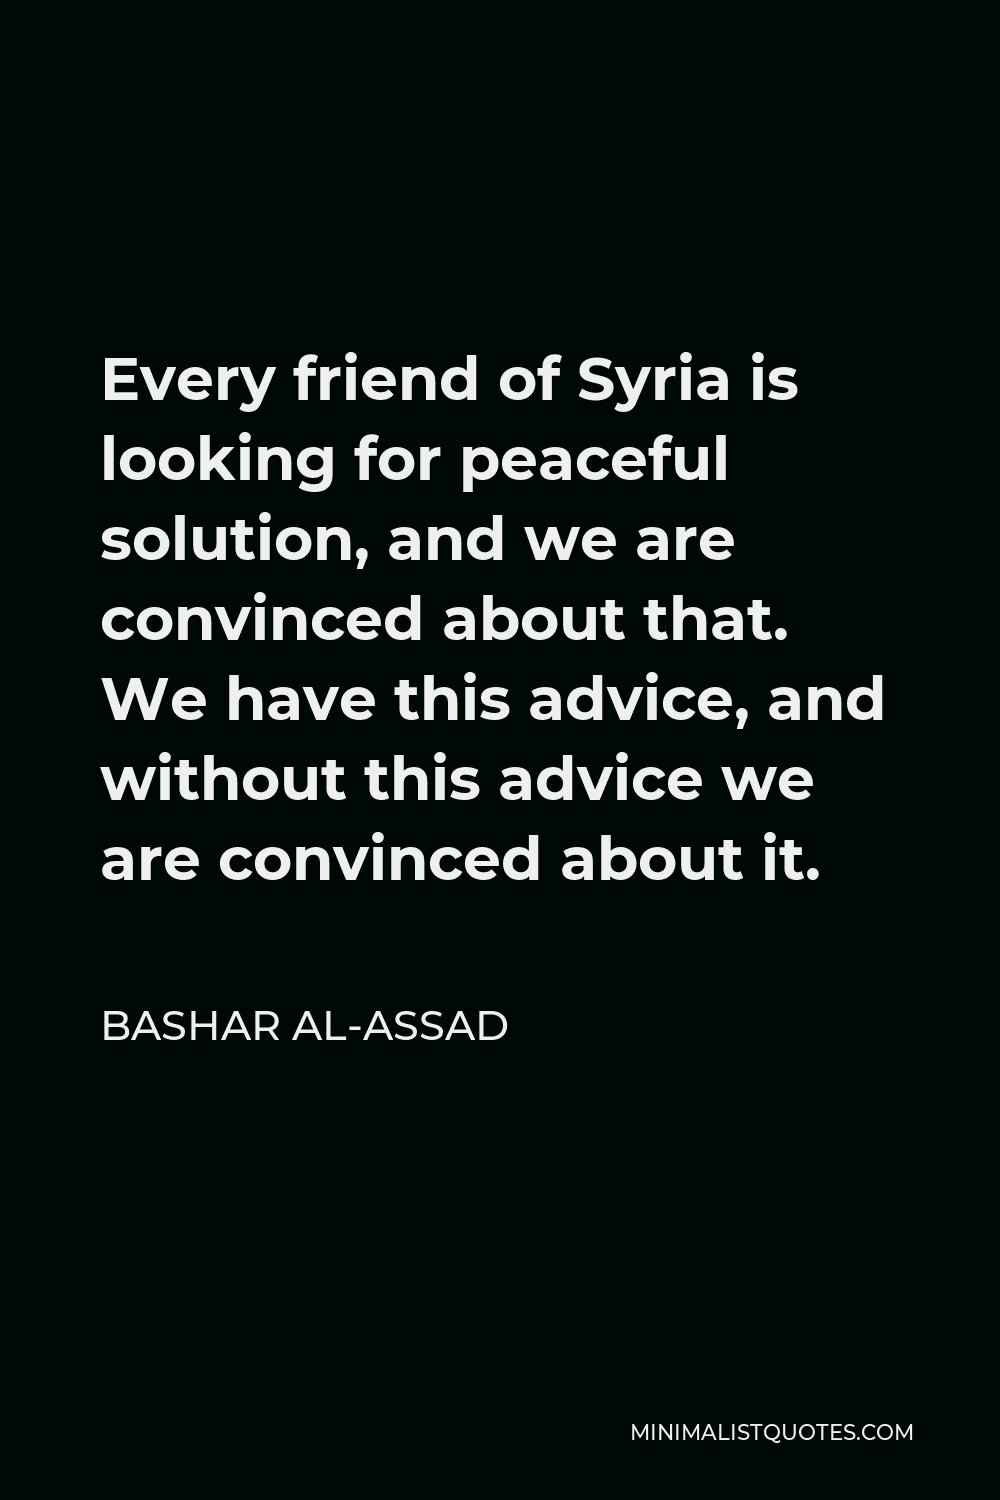 Bashar al-Assad Quote - Every friend of Syria is looking for peaceful solution, and we are convinced about that. We have this advice, and without this advice we are convinced about it.